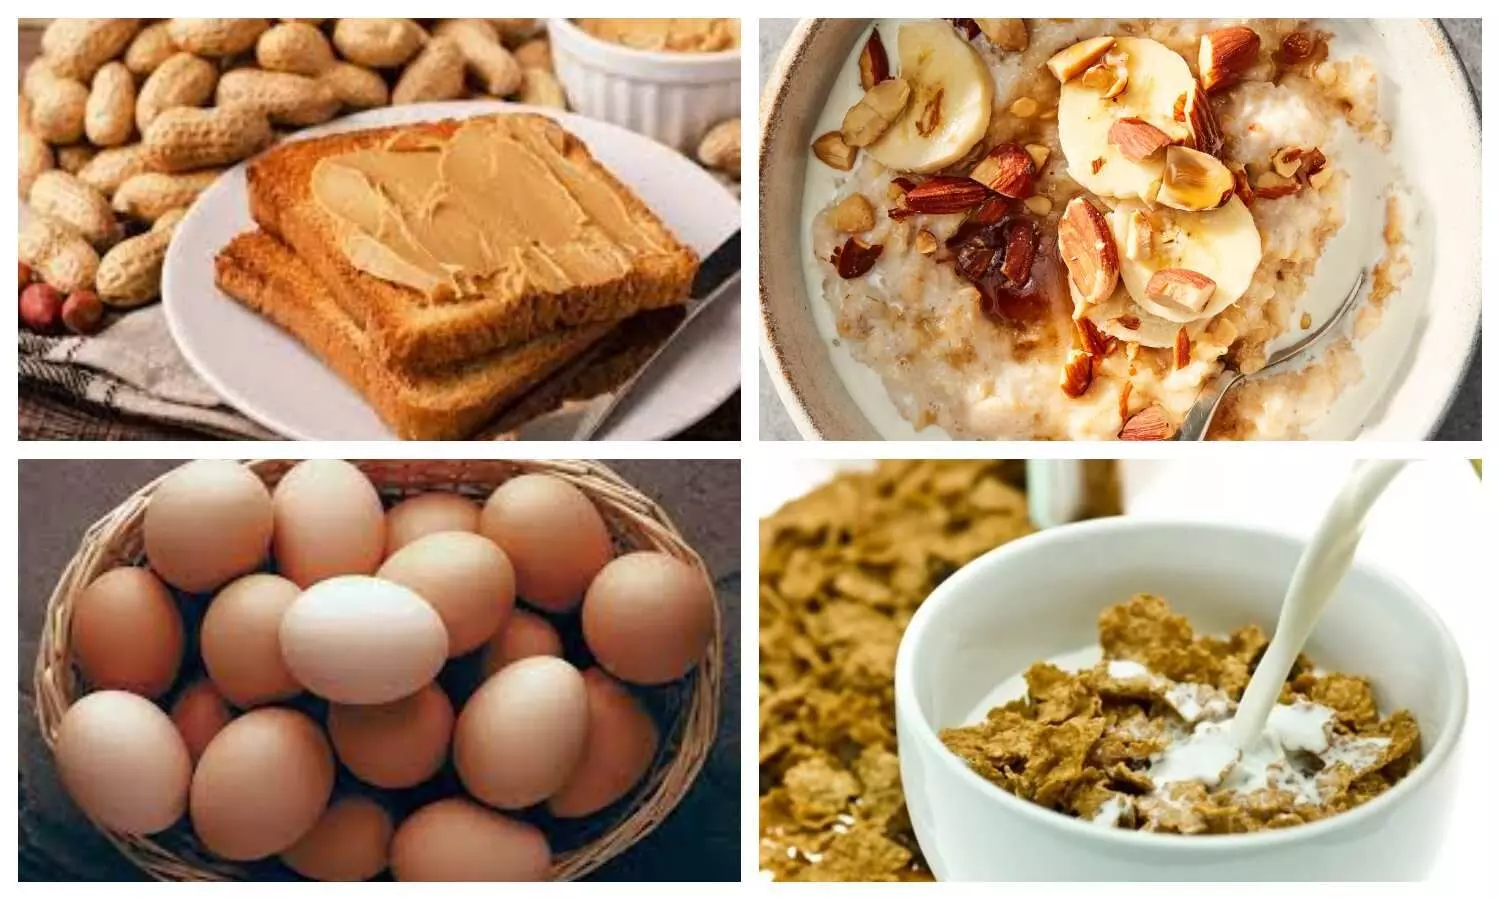 Tips for a Healthy Breakfast